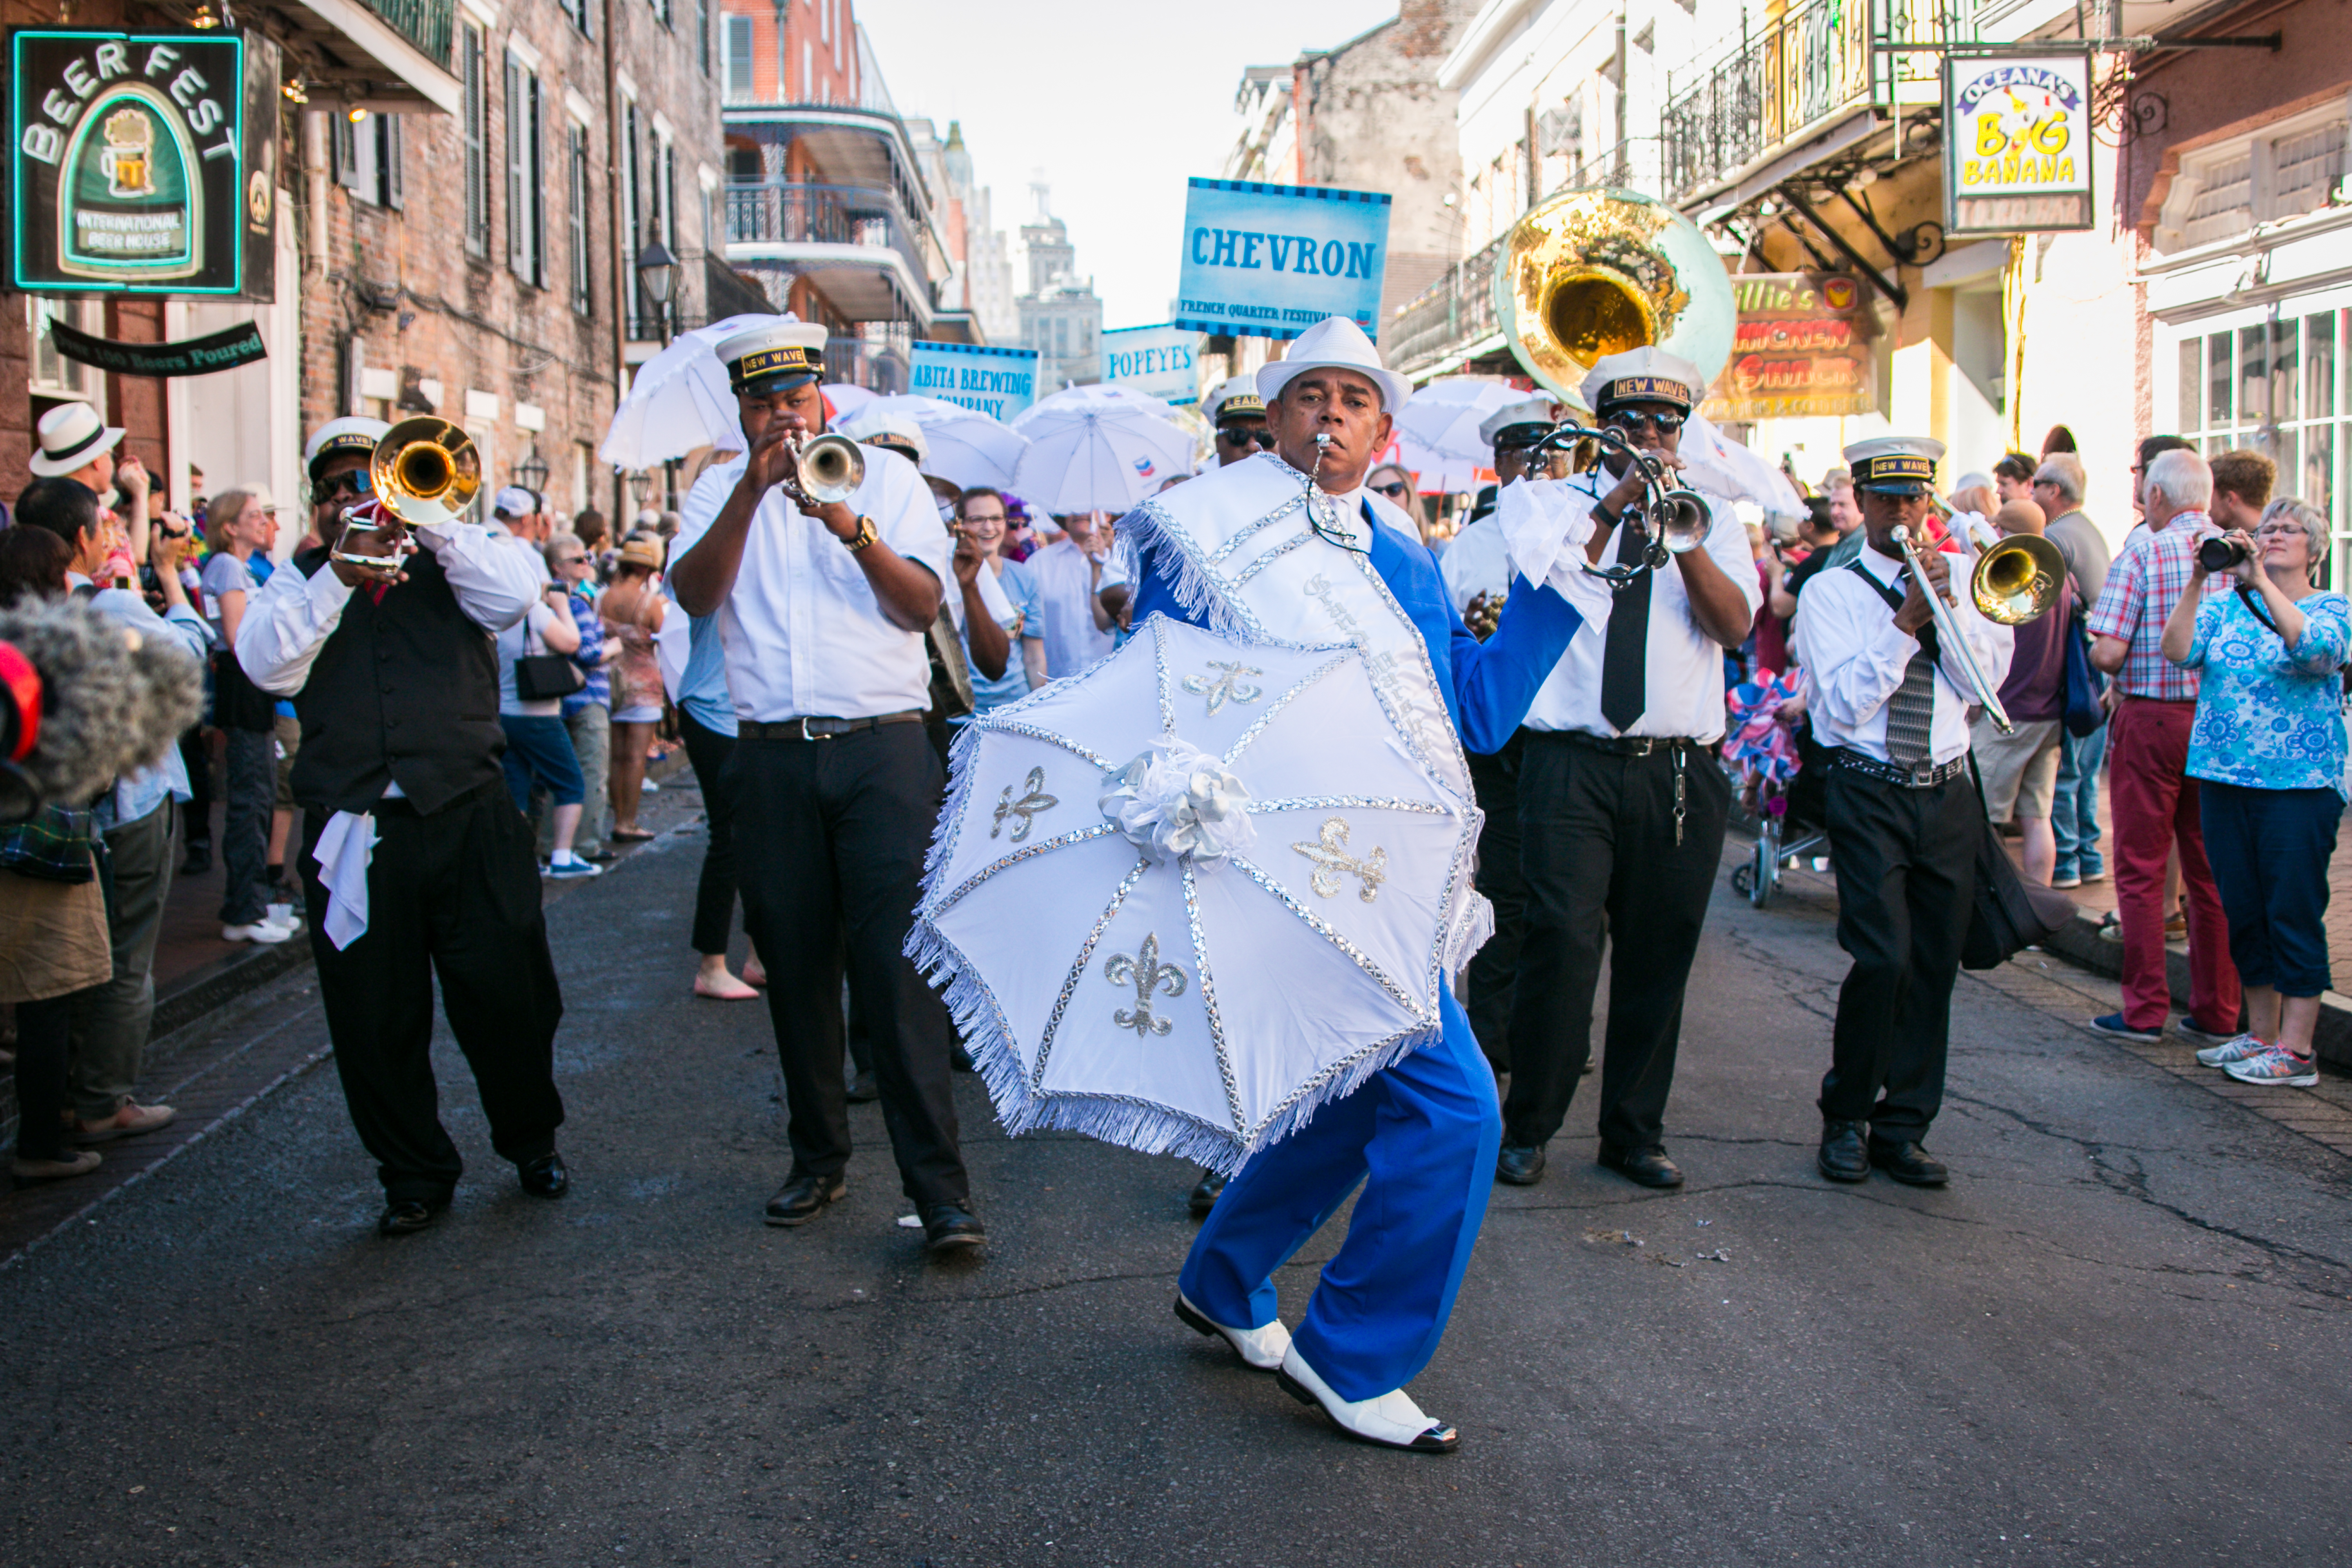 Taking the music to the streets, New Orleans-style, New Orleans'  Multicultural News Source